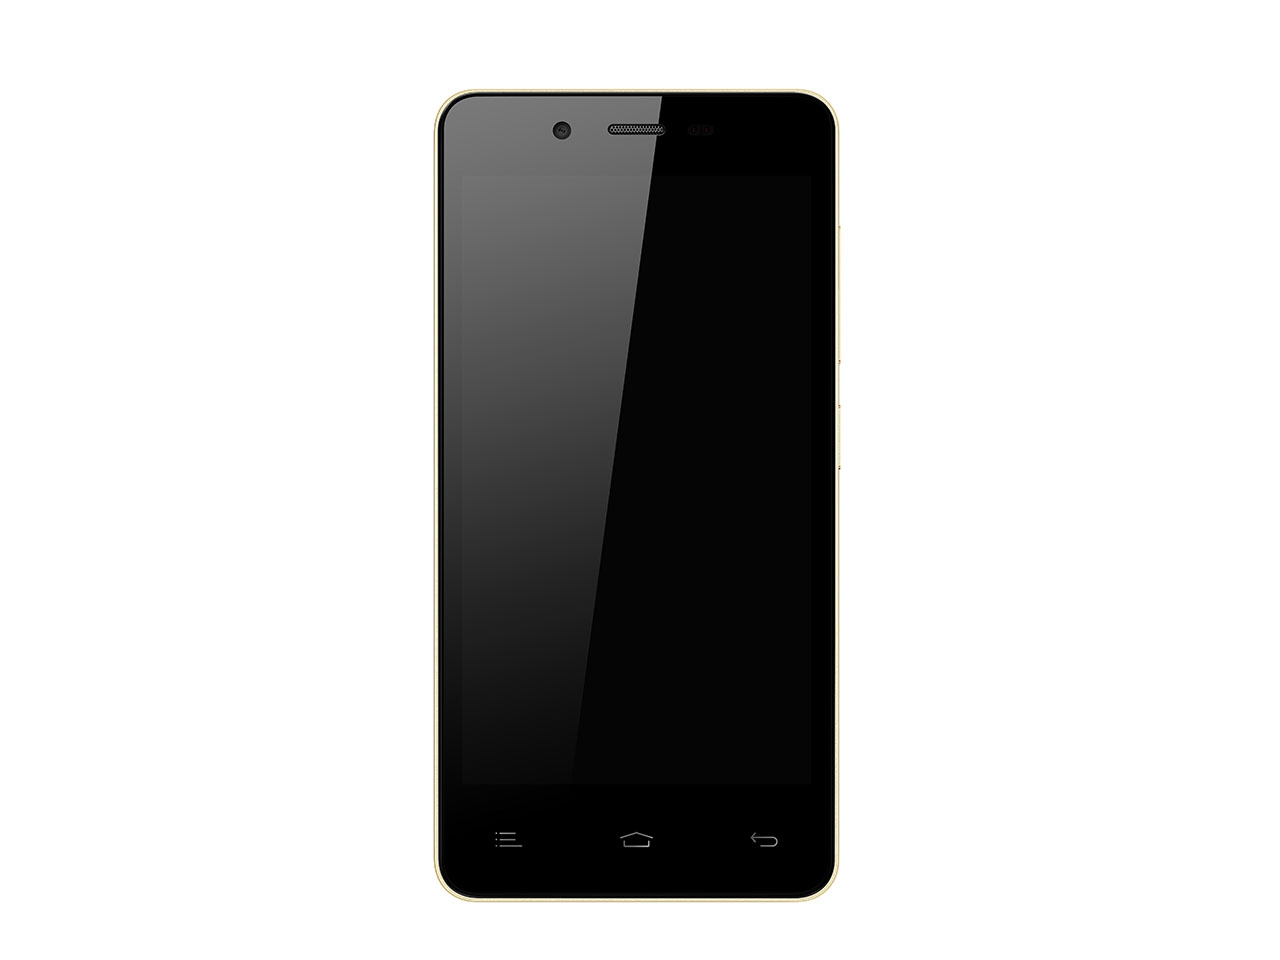 Gionee V183 front view